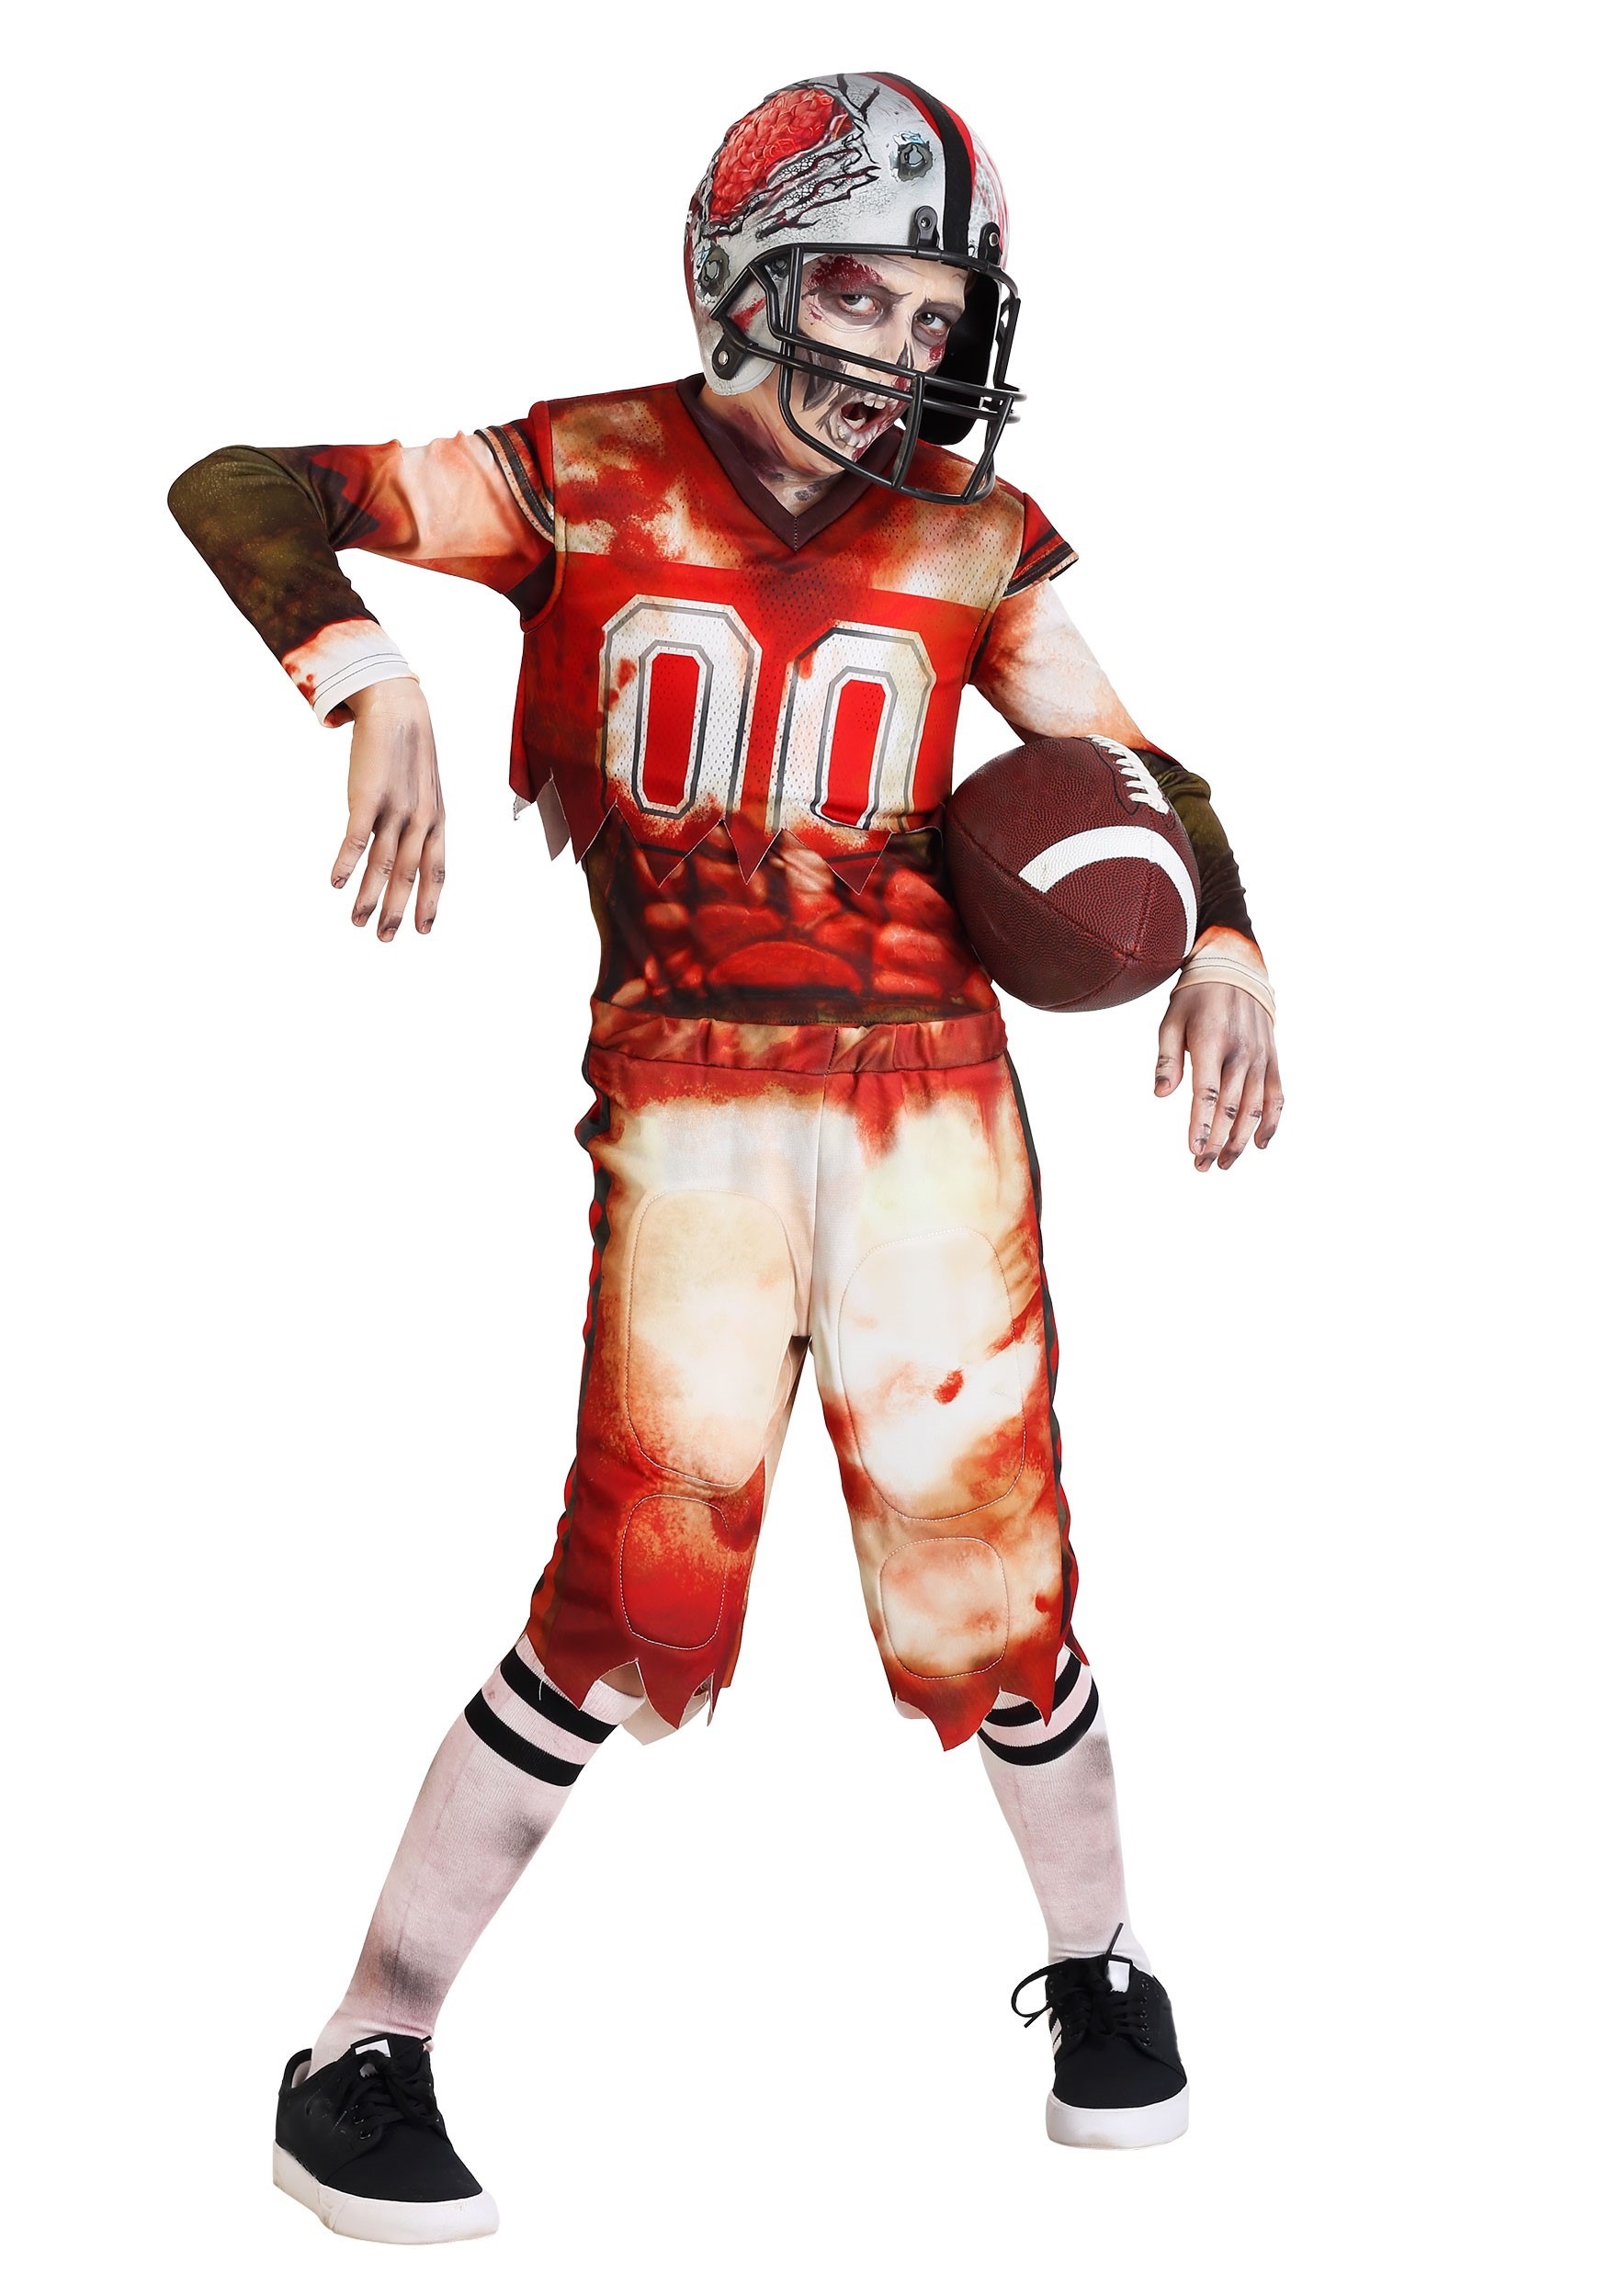 Childs Zombie Football Player Costume 